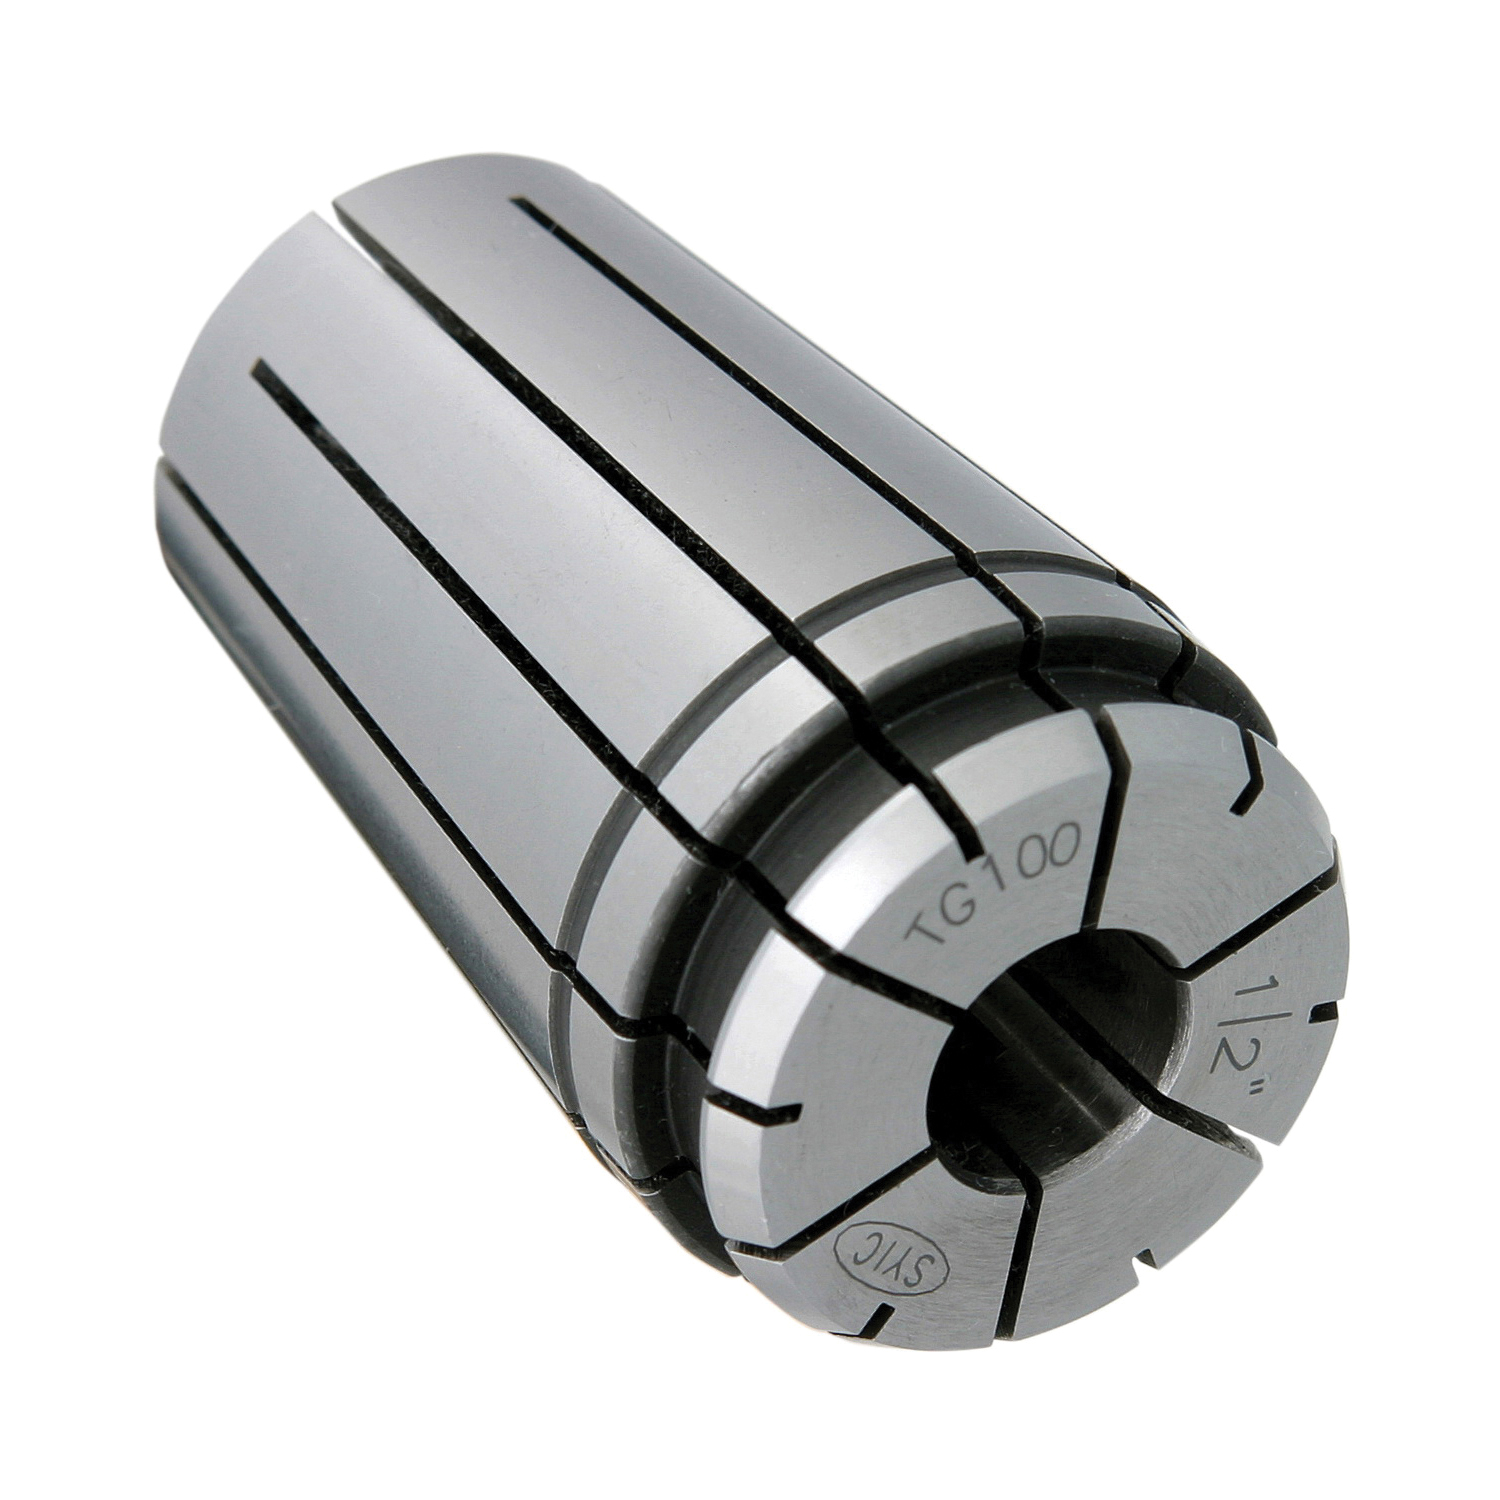 TG100 13/64" COLLET